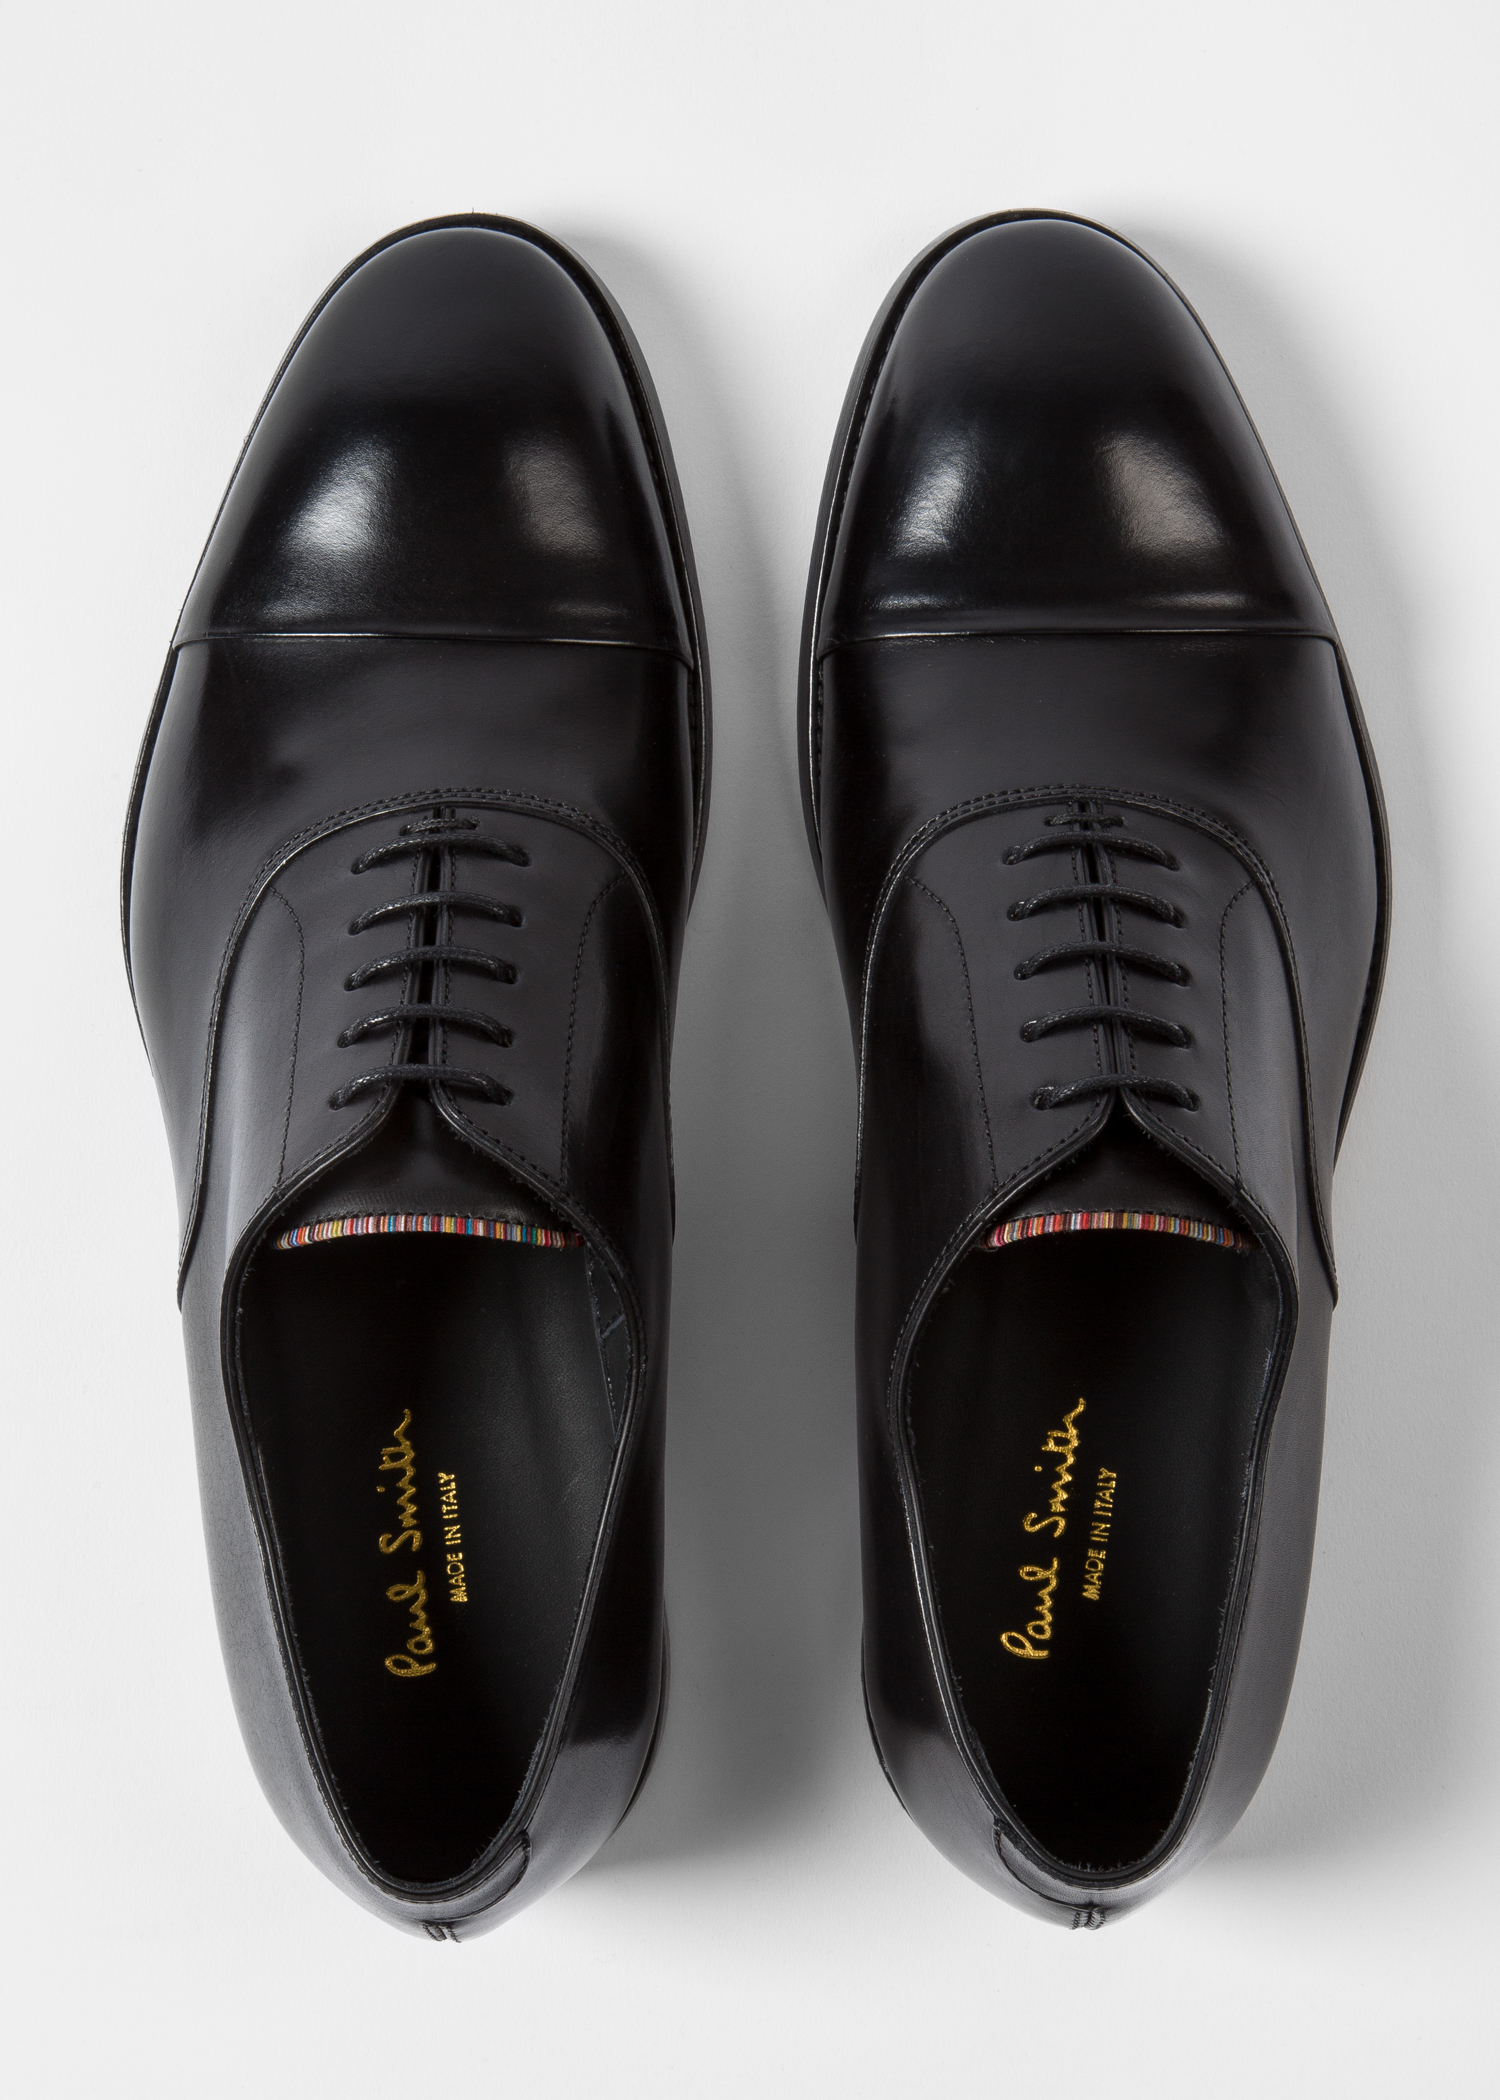 Top Down View - Men's Black Leather 'Brent' Oxford Shoes With 'Signature Stripe' Details Paul Smith